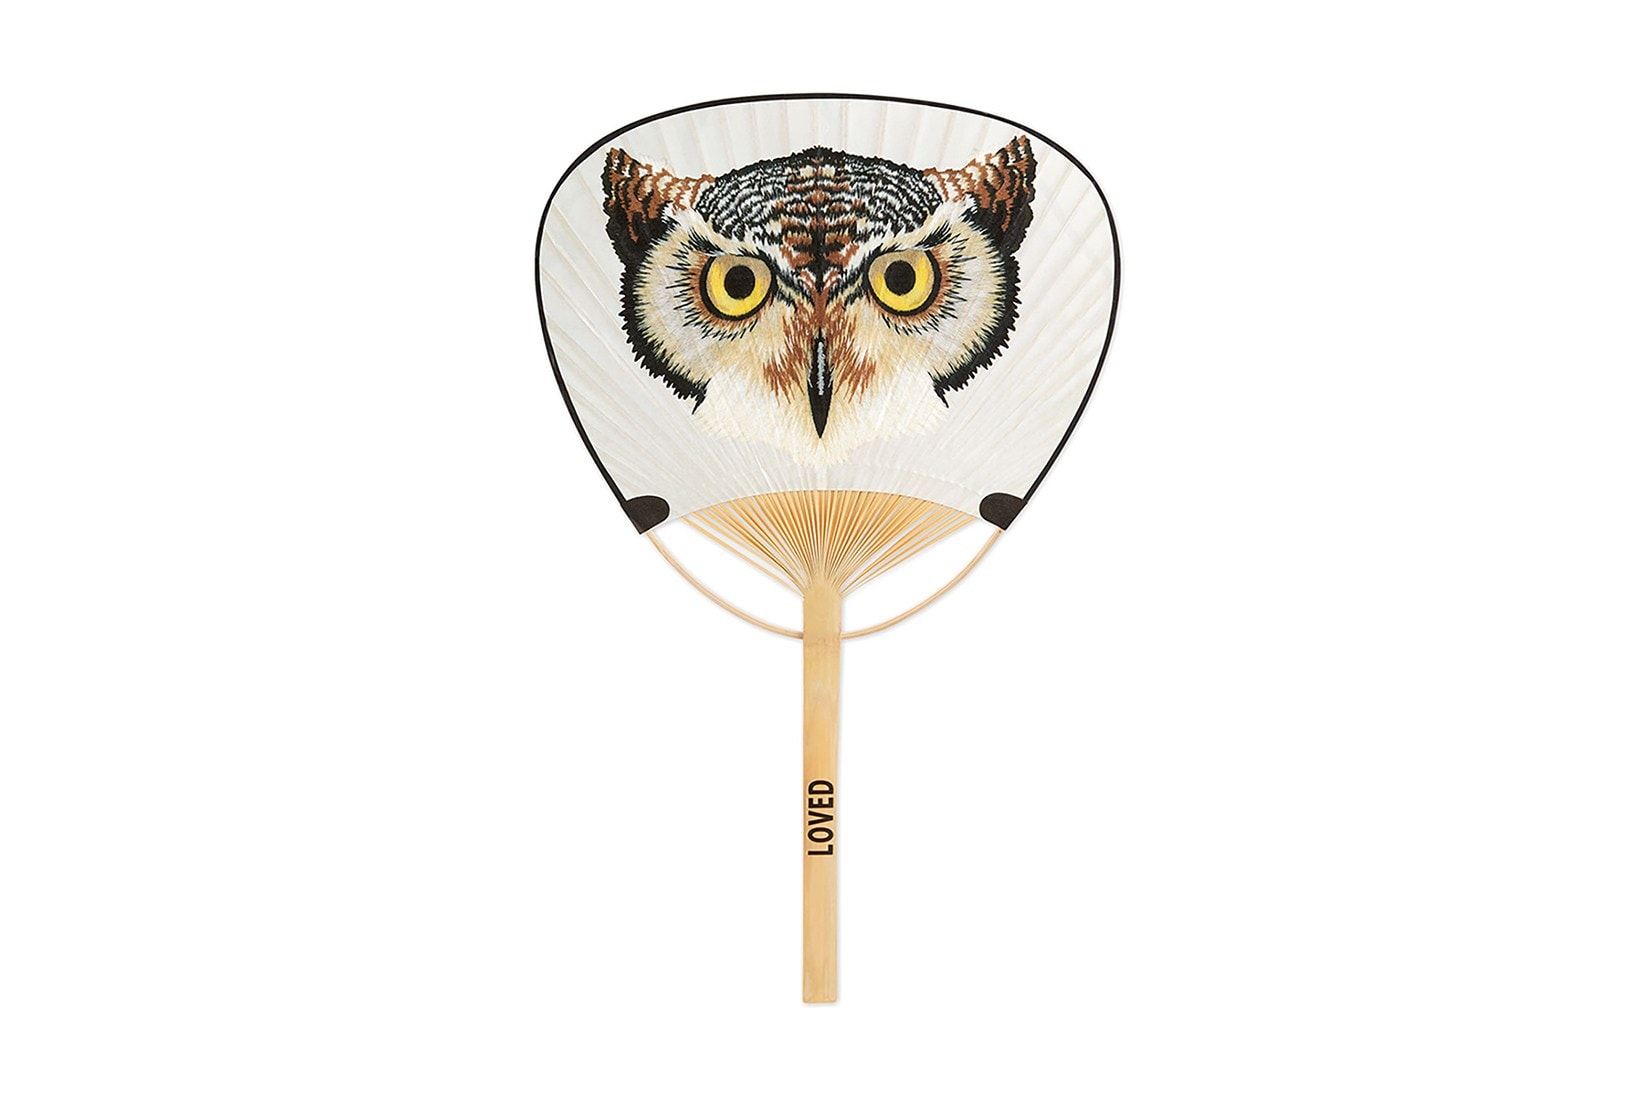 Gucci's Silk Fans Will Cost You $450 USD 2017 Japan Paper Wood Ebony Owl painted Alessandro Michele